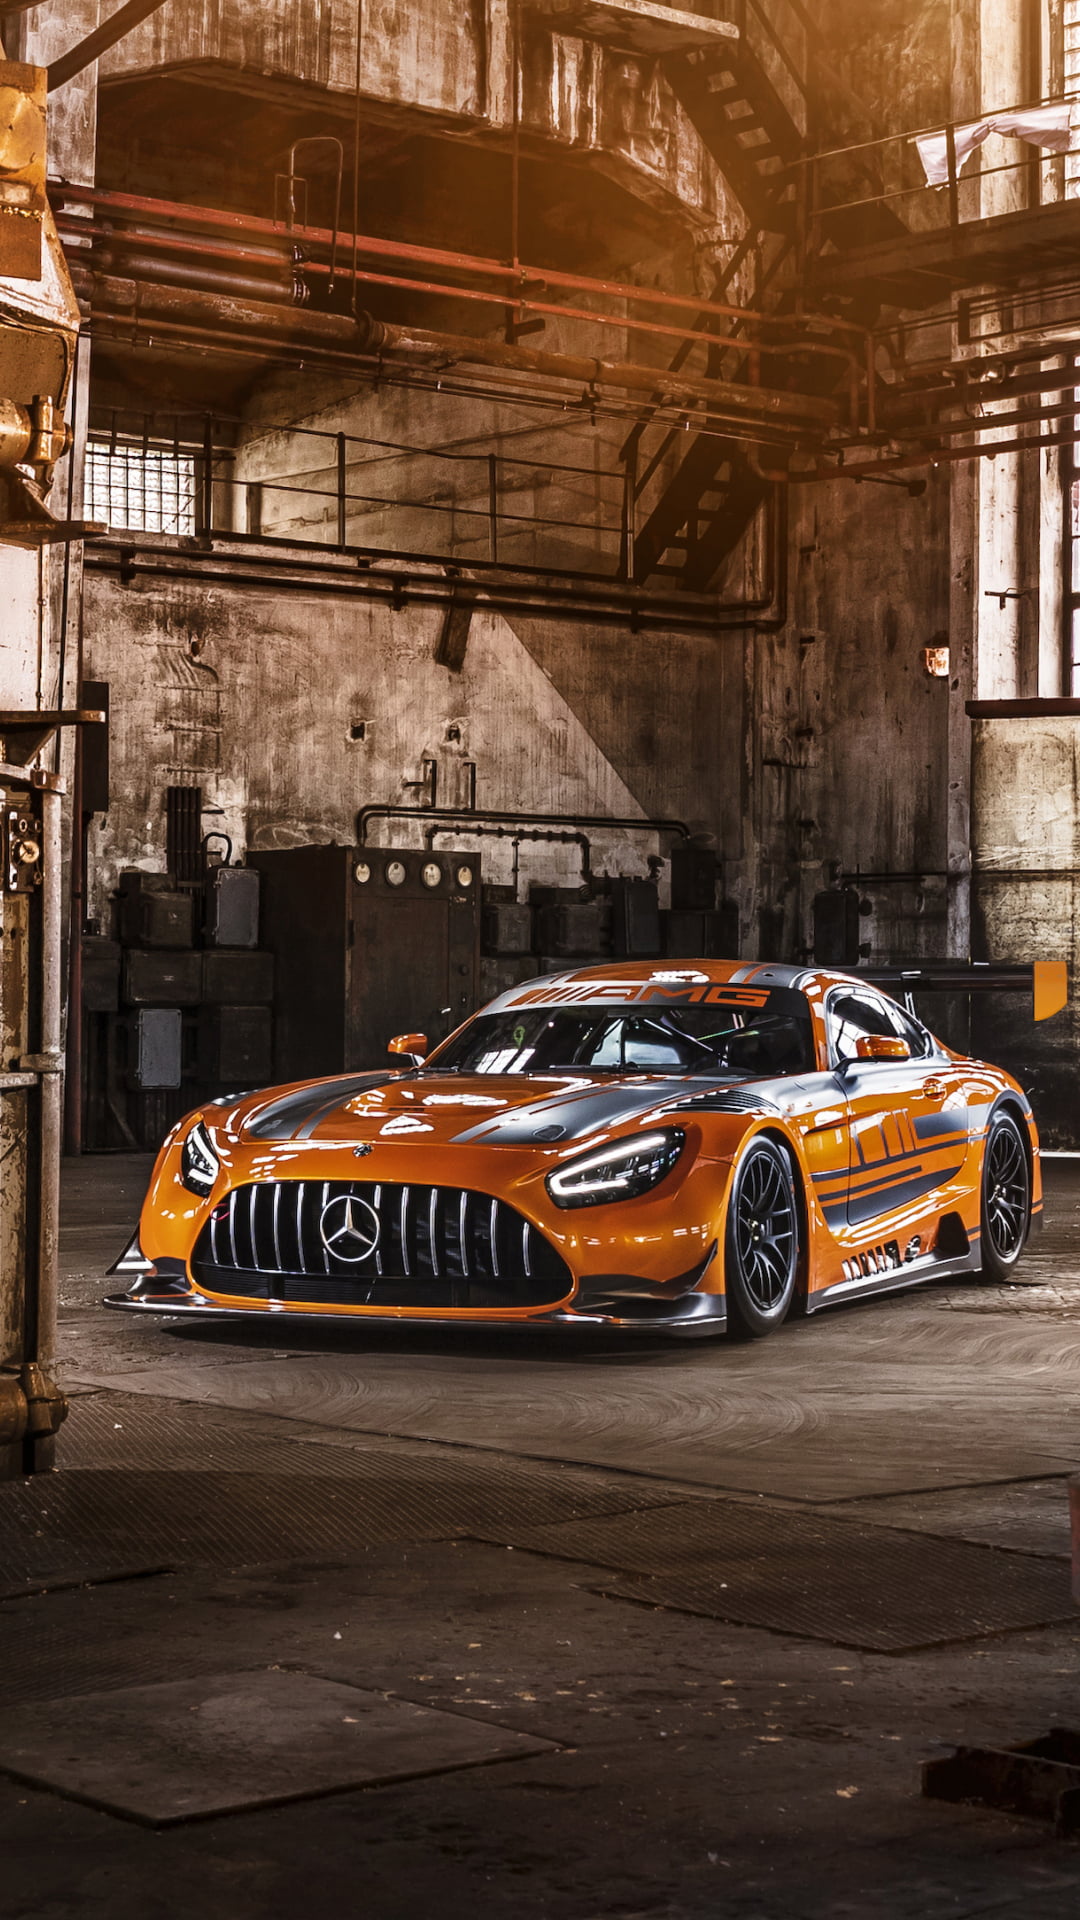 The Mercedes AMG GT